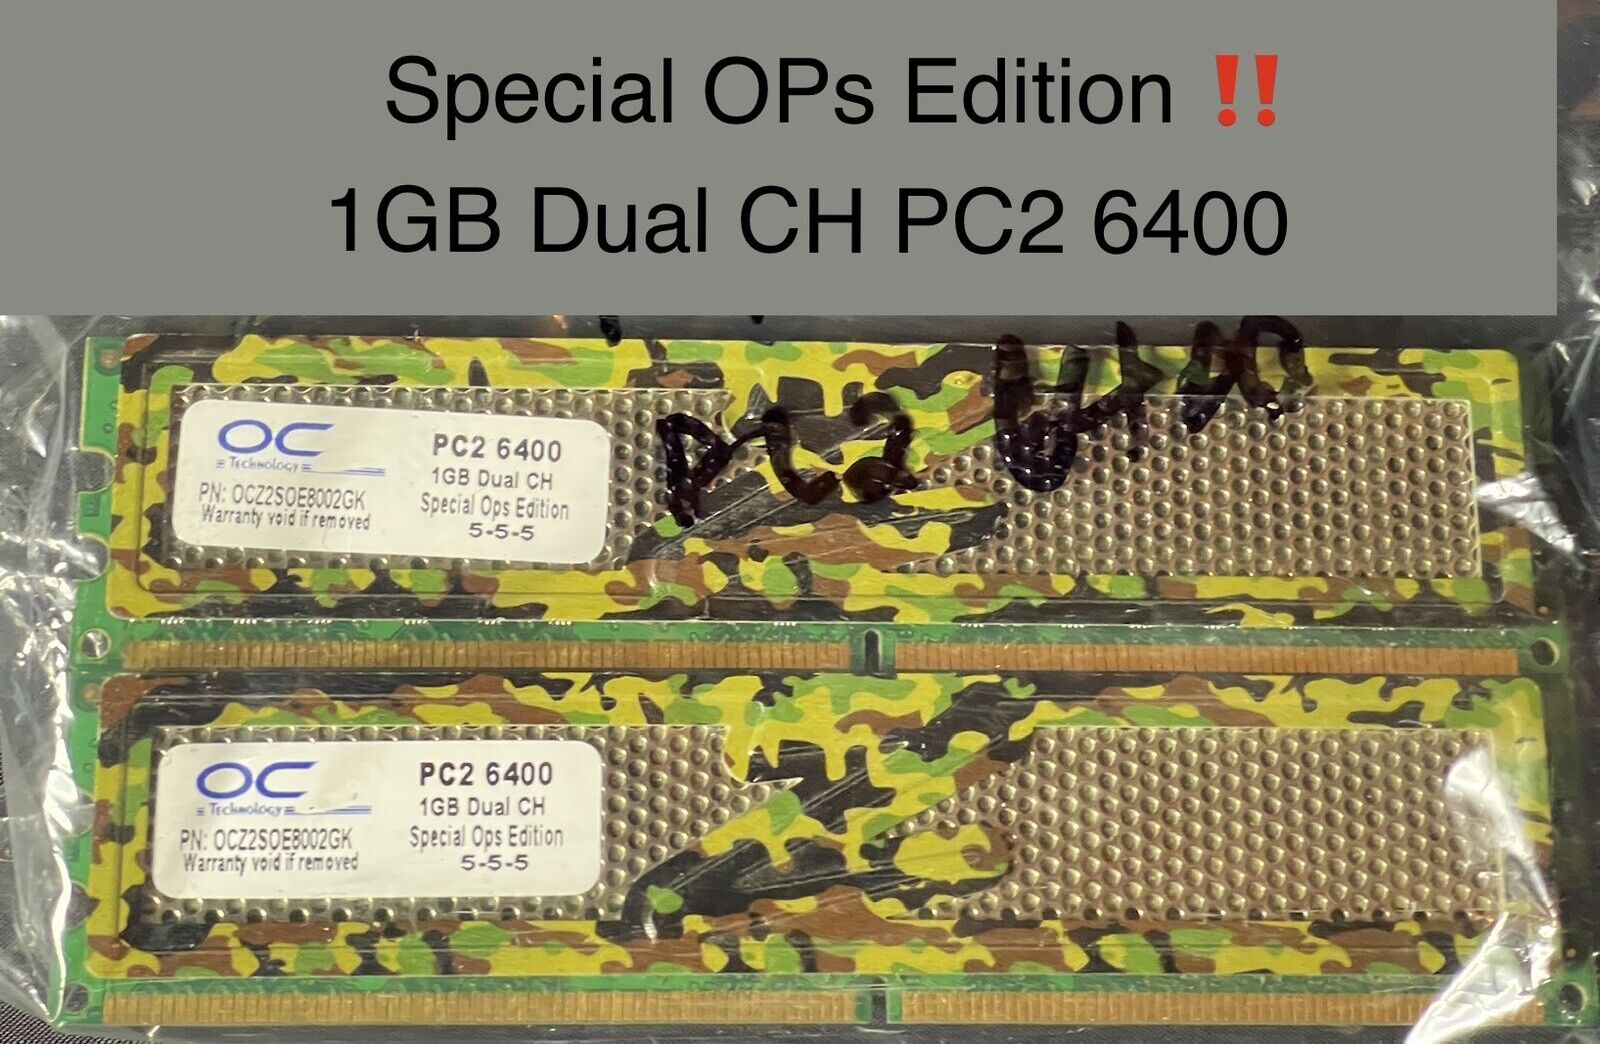 (x2) 1GB Dual Channel PC2 6400 - Special Ops Edition- OCZ2P8002GK Memory (RAM)